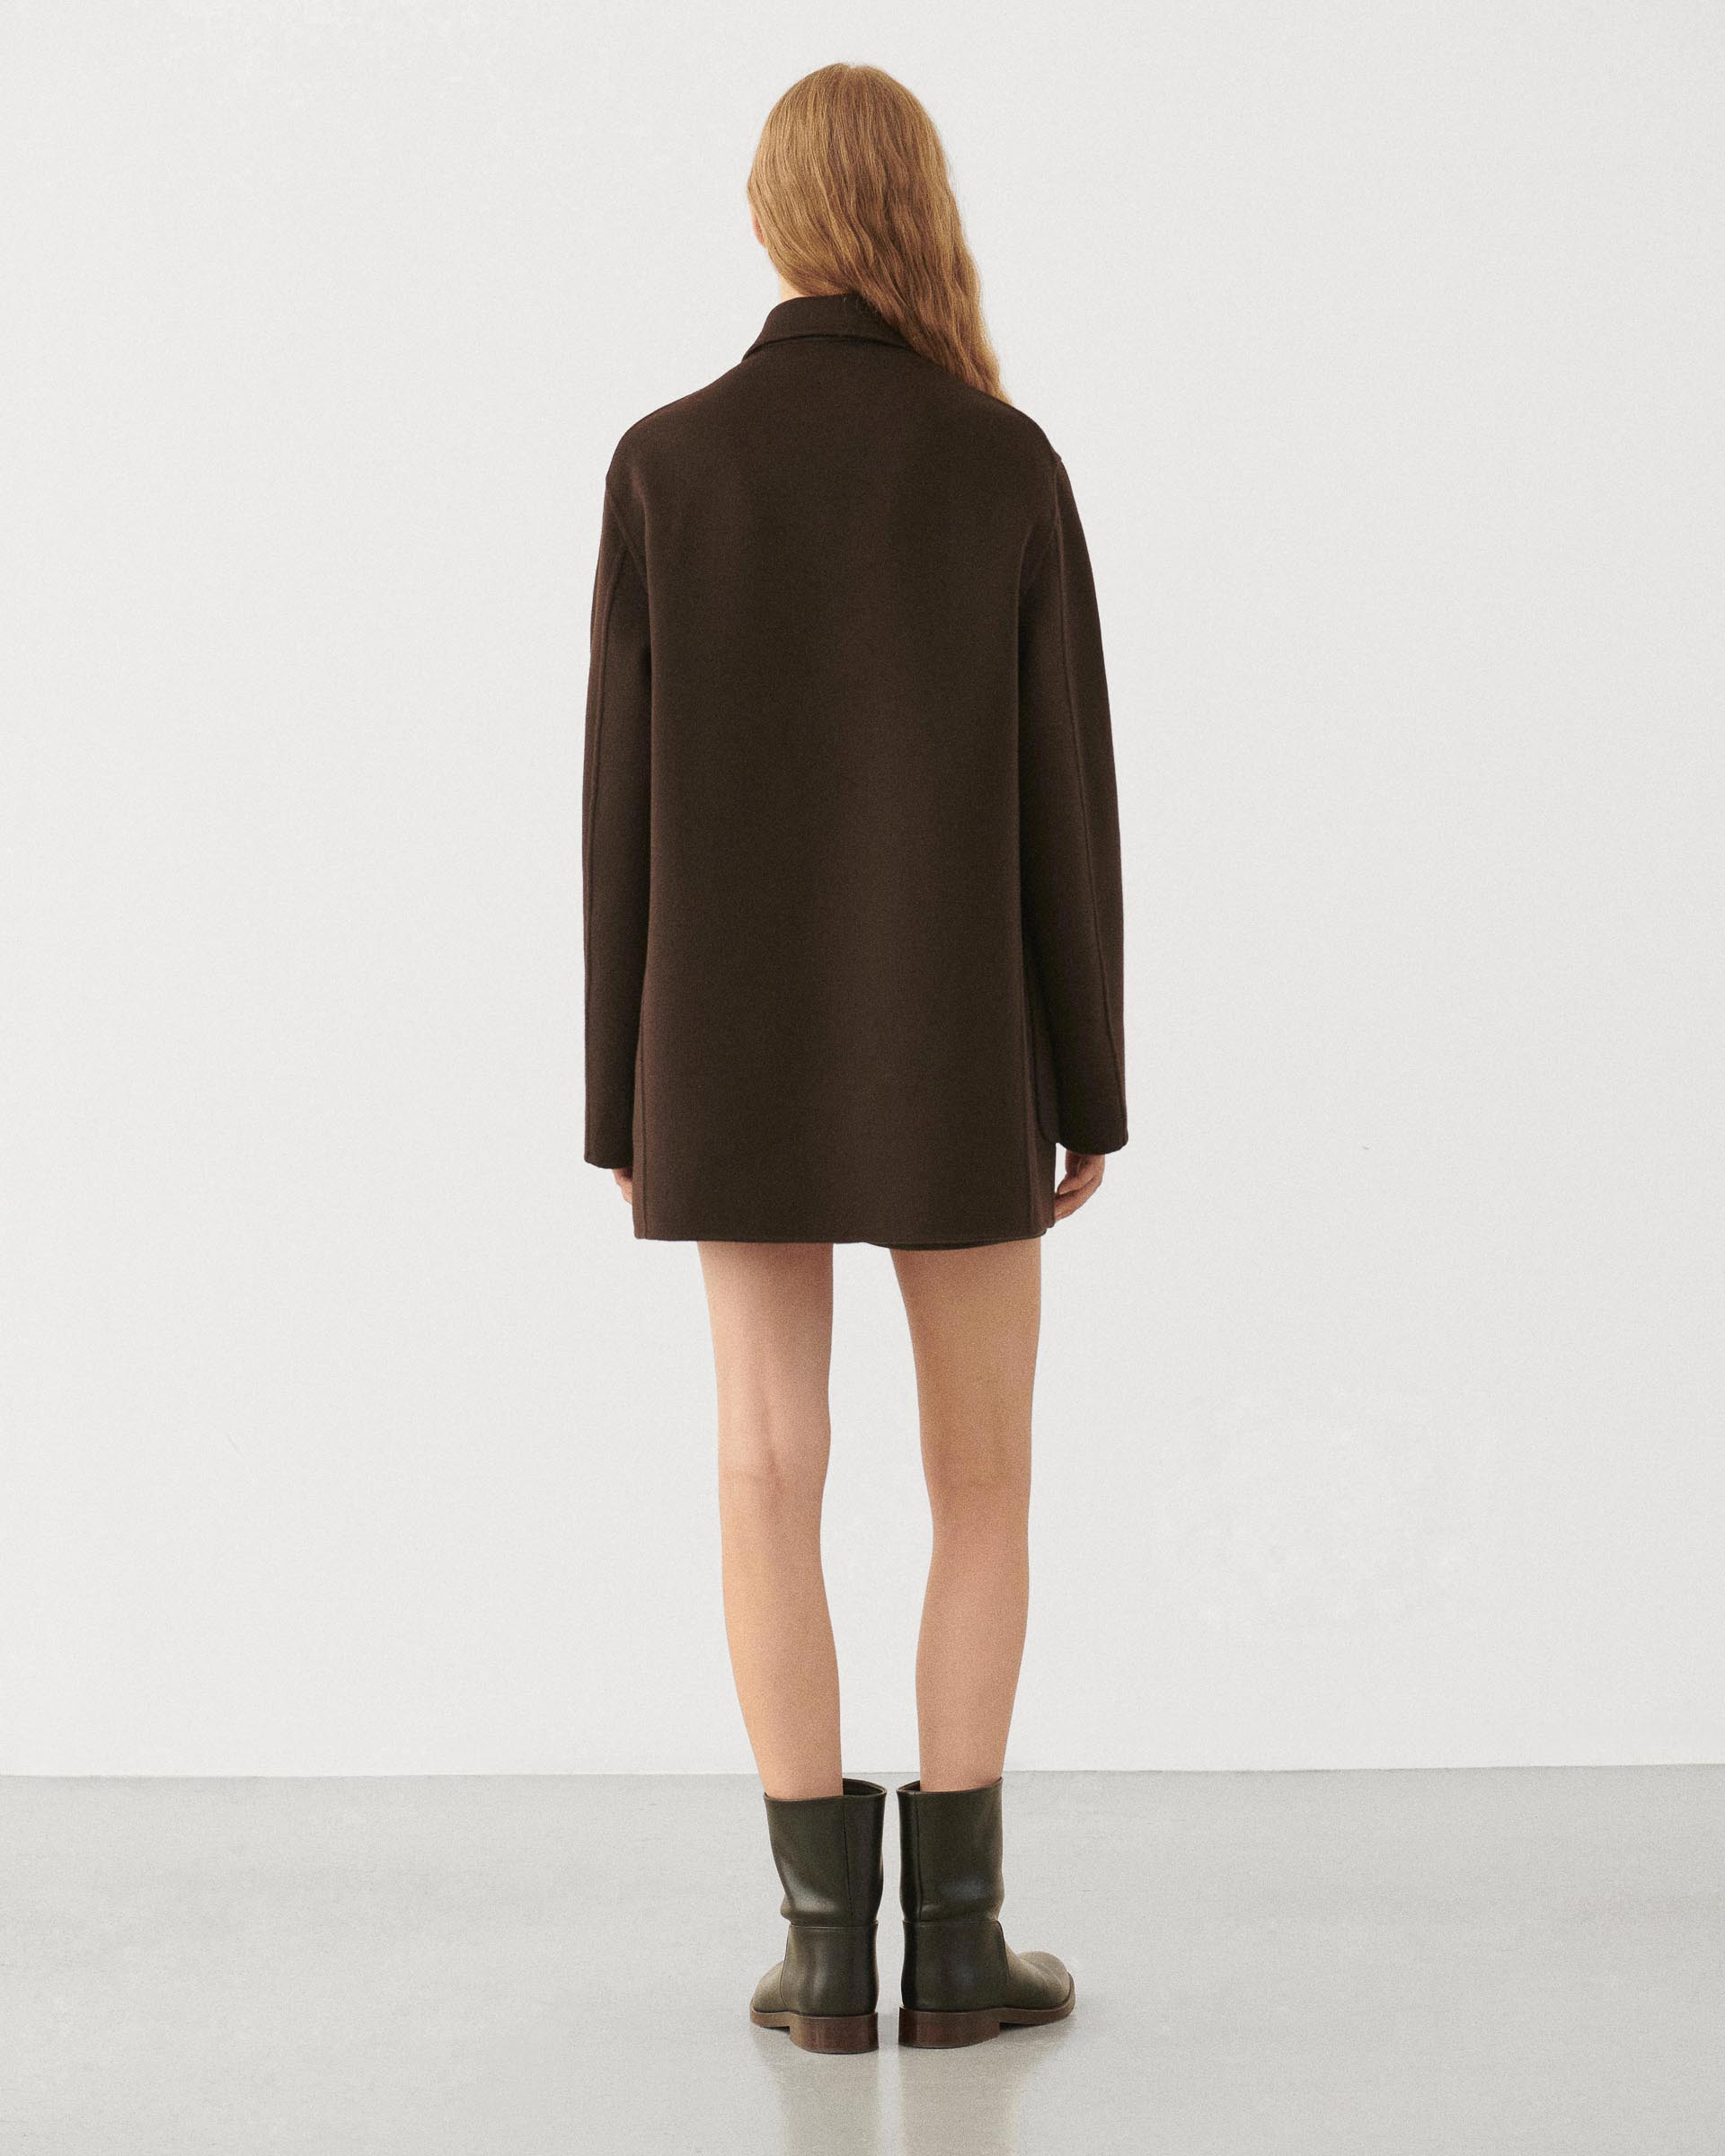 Amaia Jacket in Double Cashmere, Chocolate